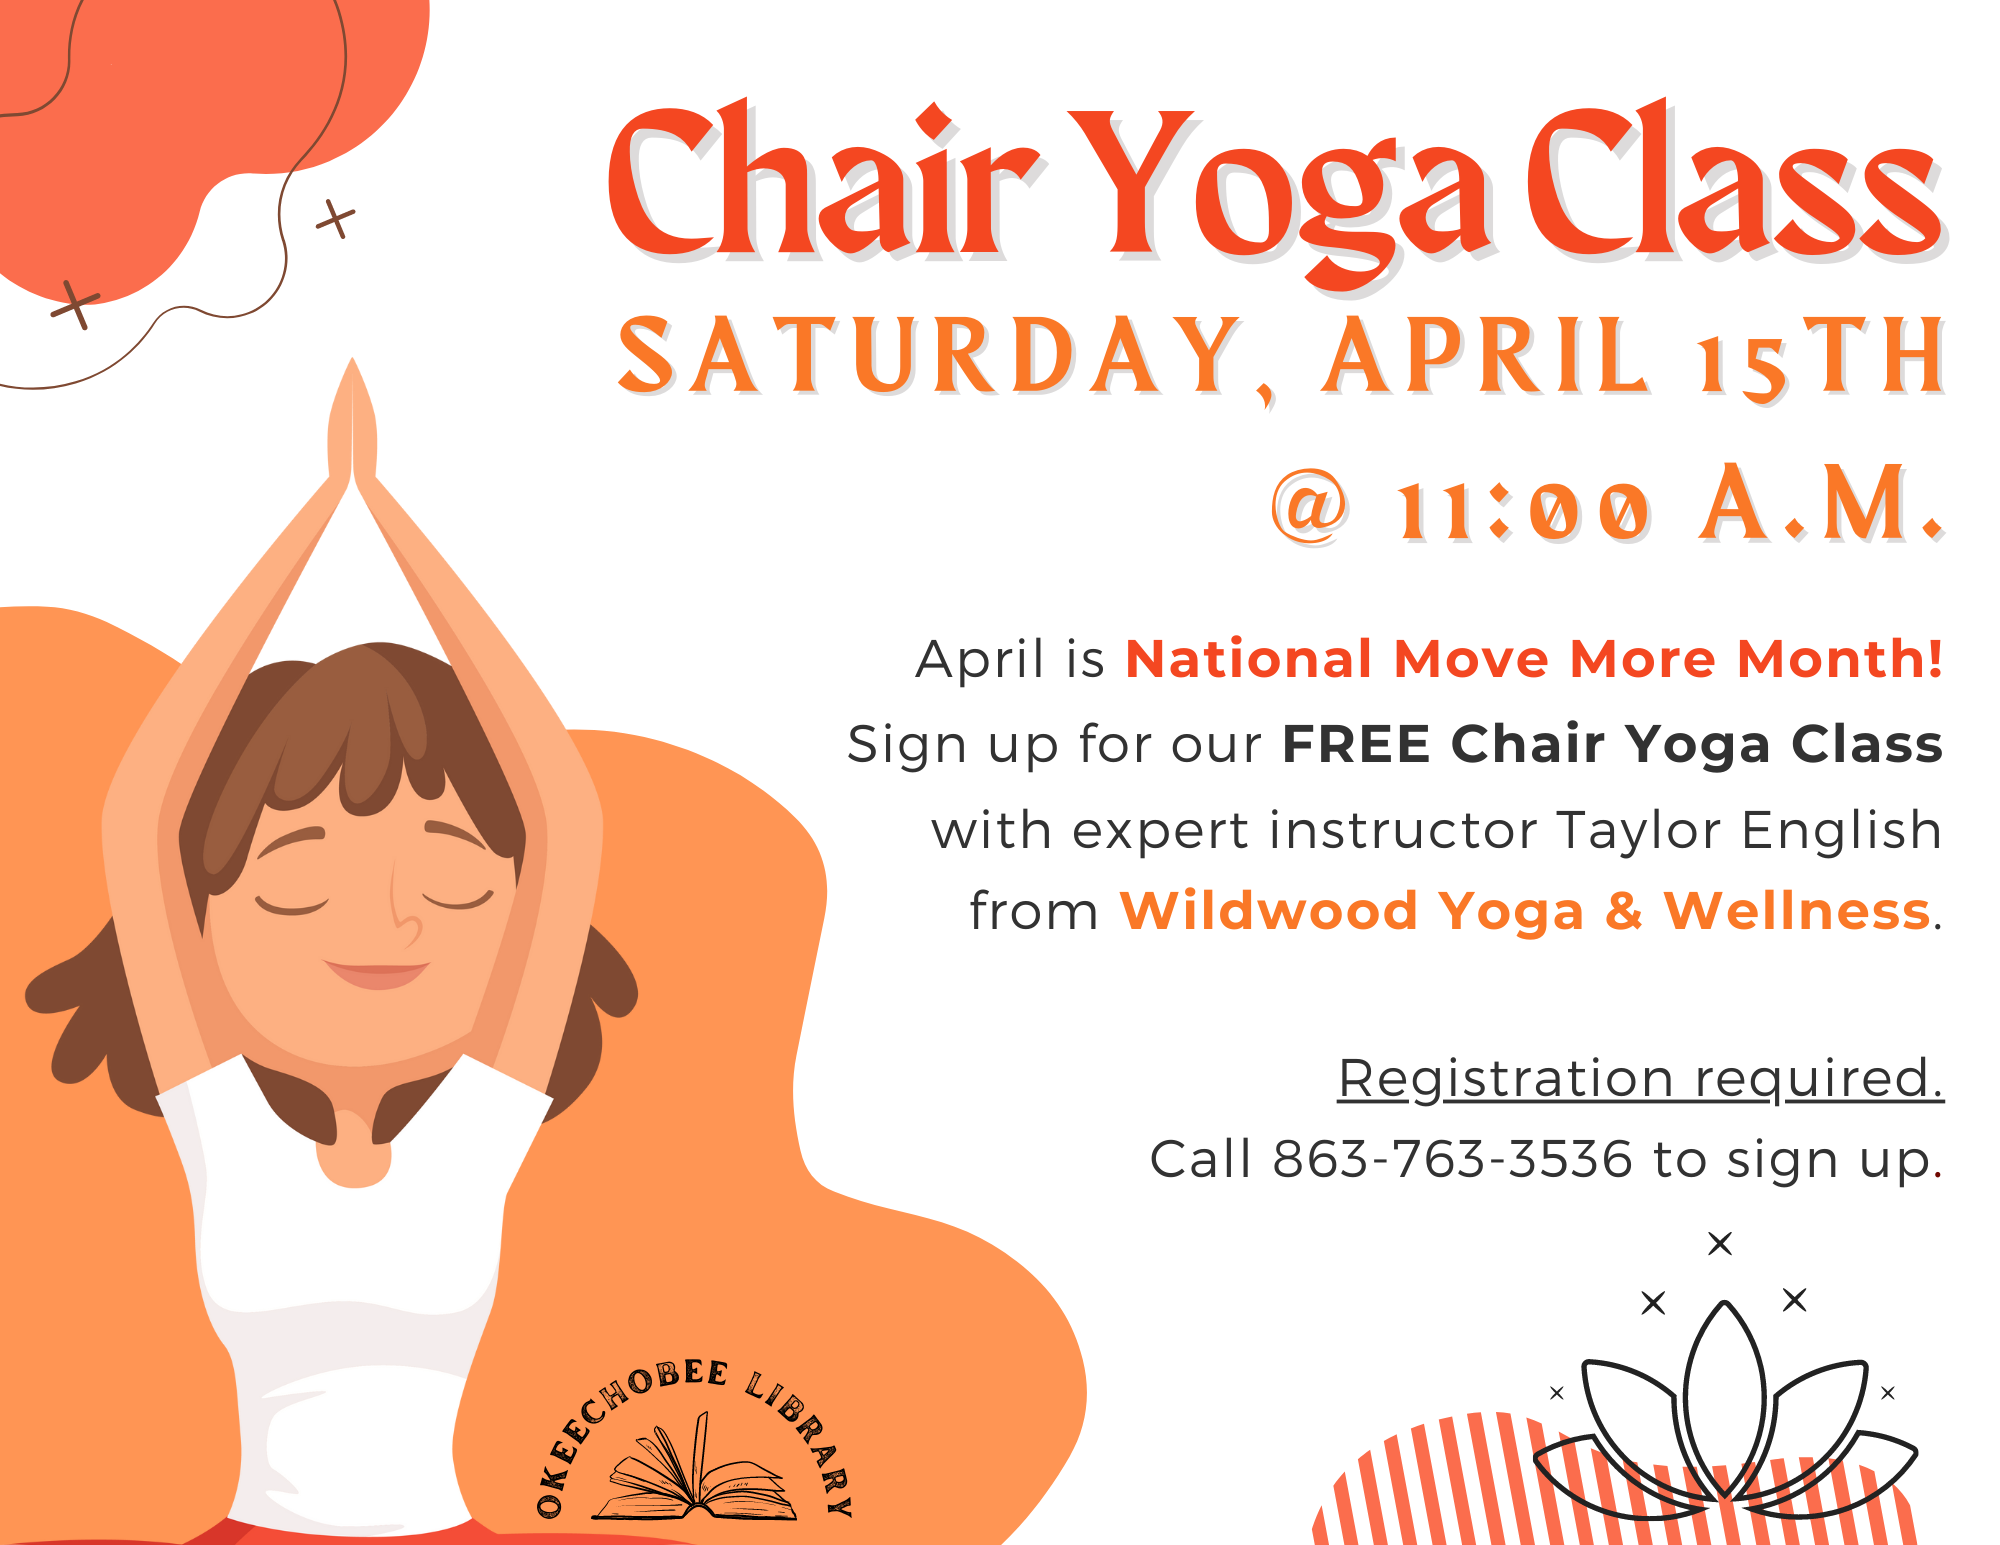 Sign up for our FREE Chair Yoga Class on Saturday, April 15th @ 11:00 a.m. with expert instructor Taylor English from Wildwood Yoga & Wellness!